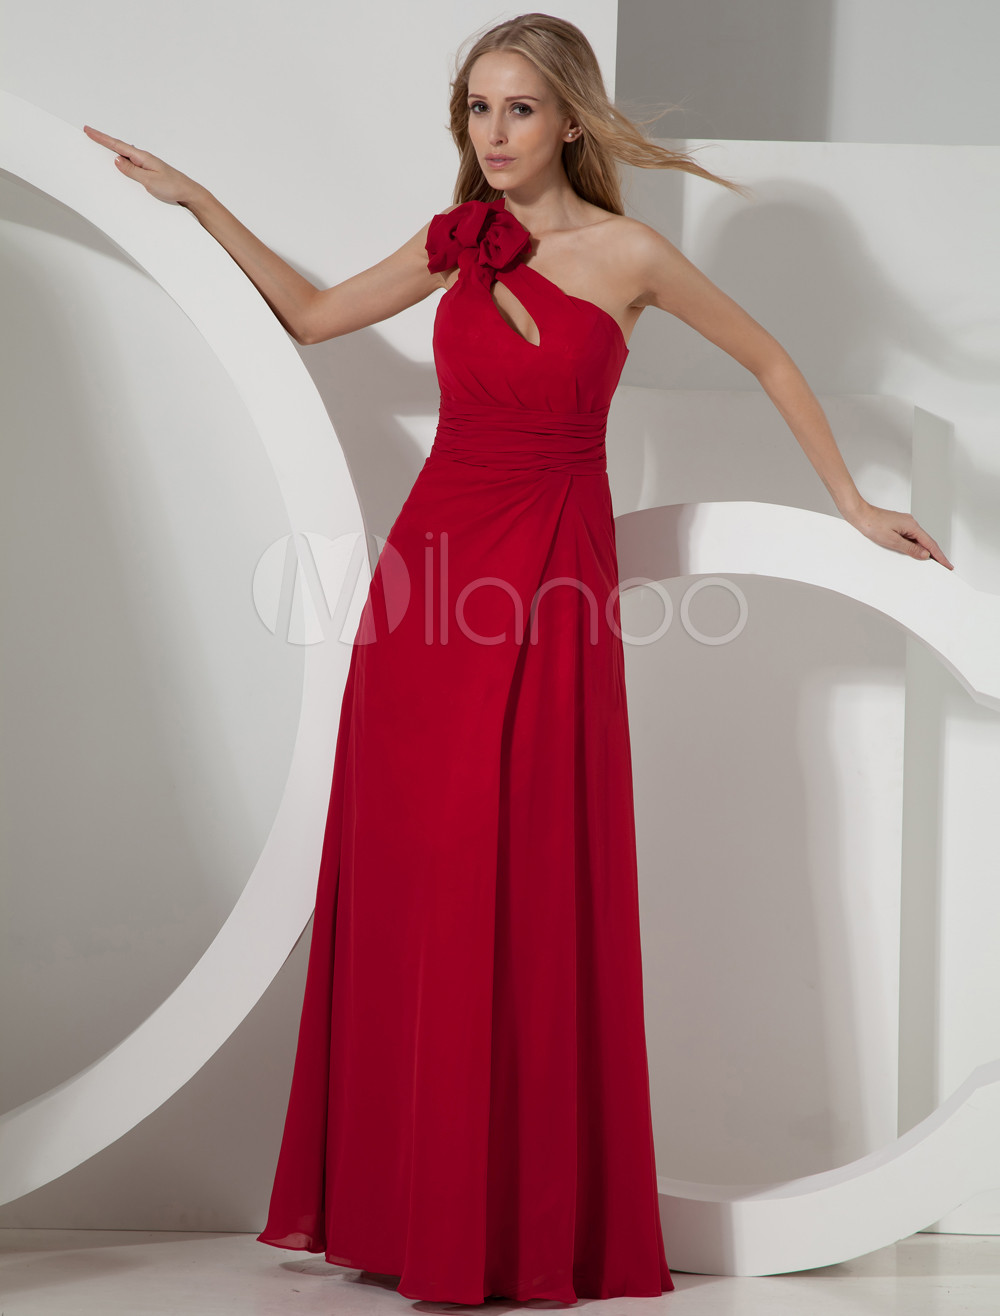 Red One-Shoulder Bow Chiffon Woman's Prom Dress (Wedding Cheap Party Dress) photo